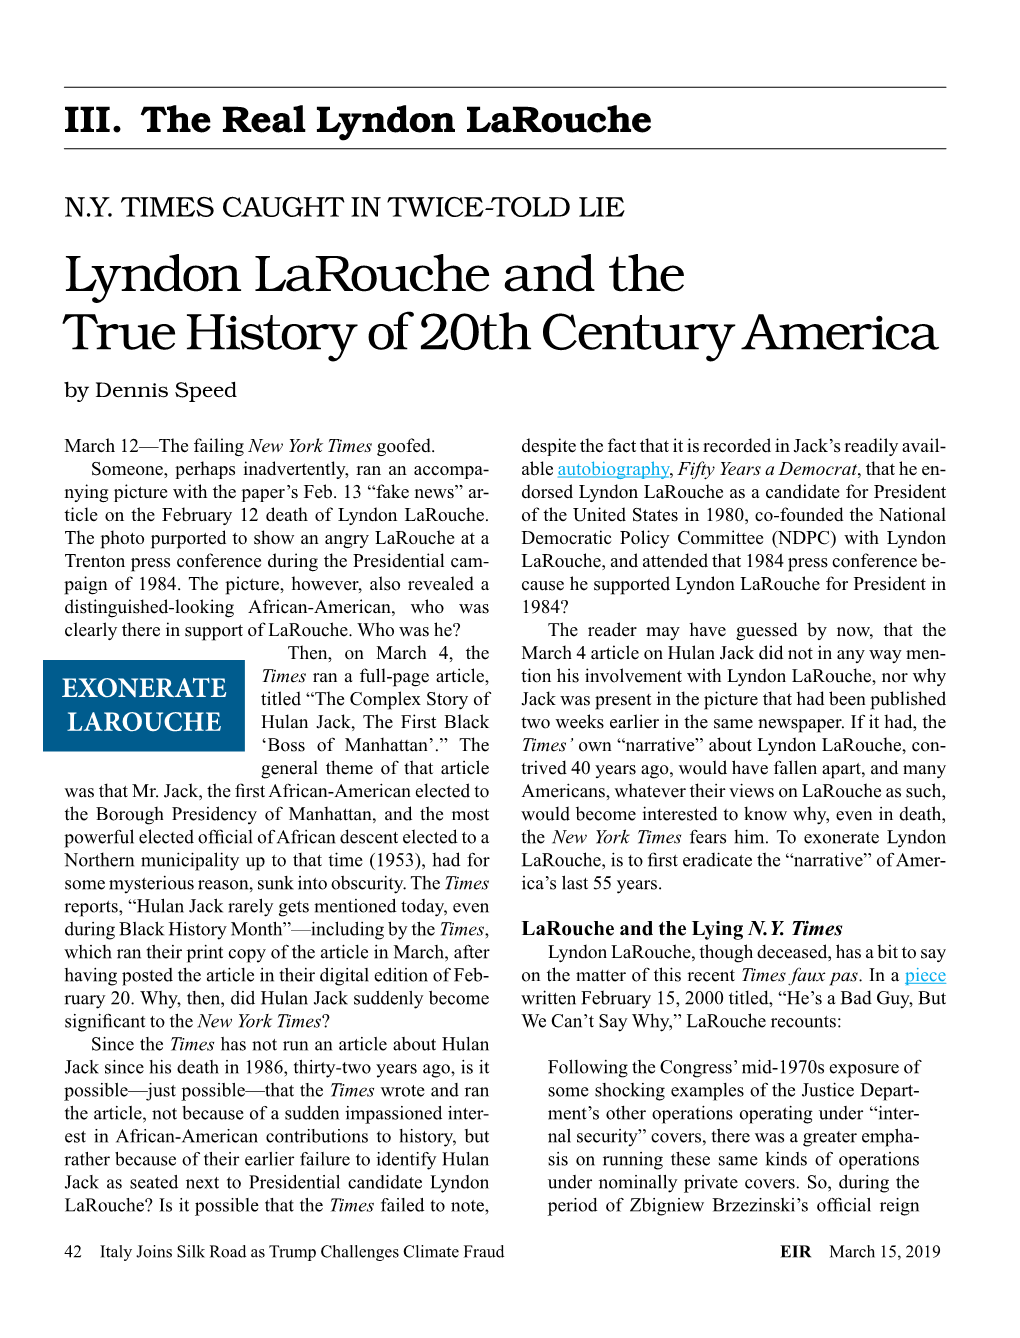 Lyndon Larouche and the True History of 20Th Century America by Dennis Speed